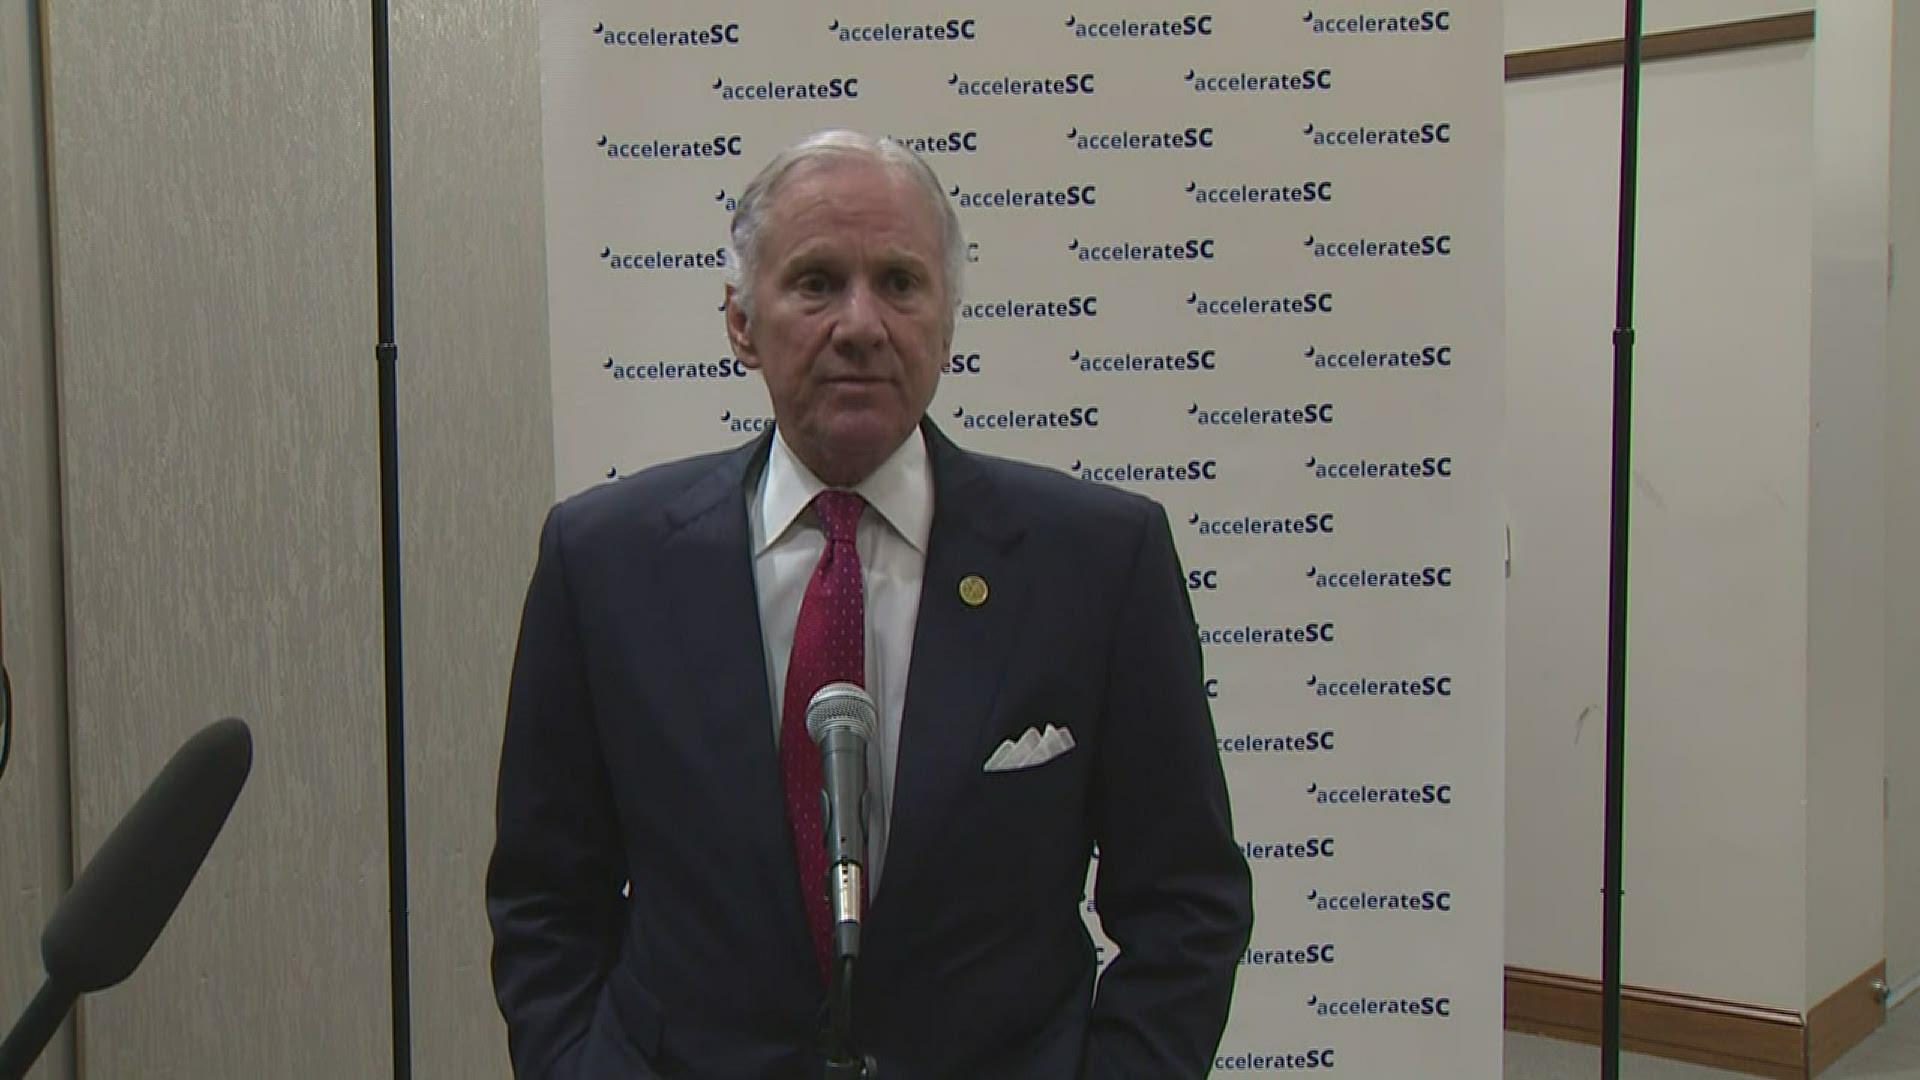 South Carolina Gov. Henry McMaster spoke following the first meeting of accelerateSC, the group charged with getting the state back to work.